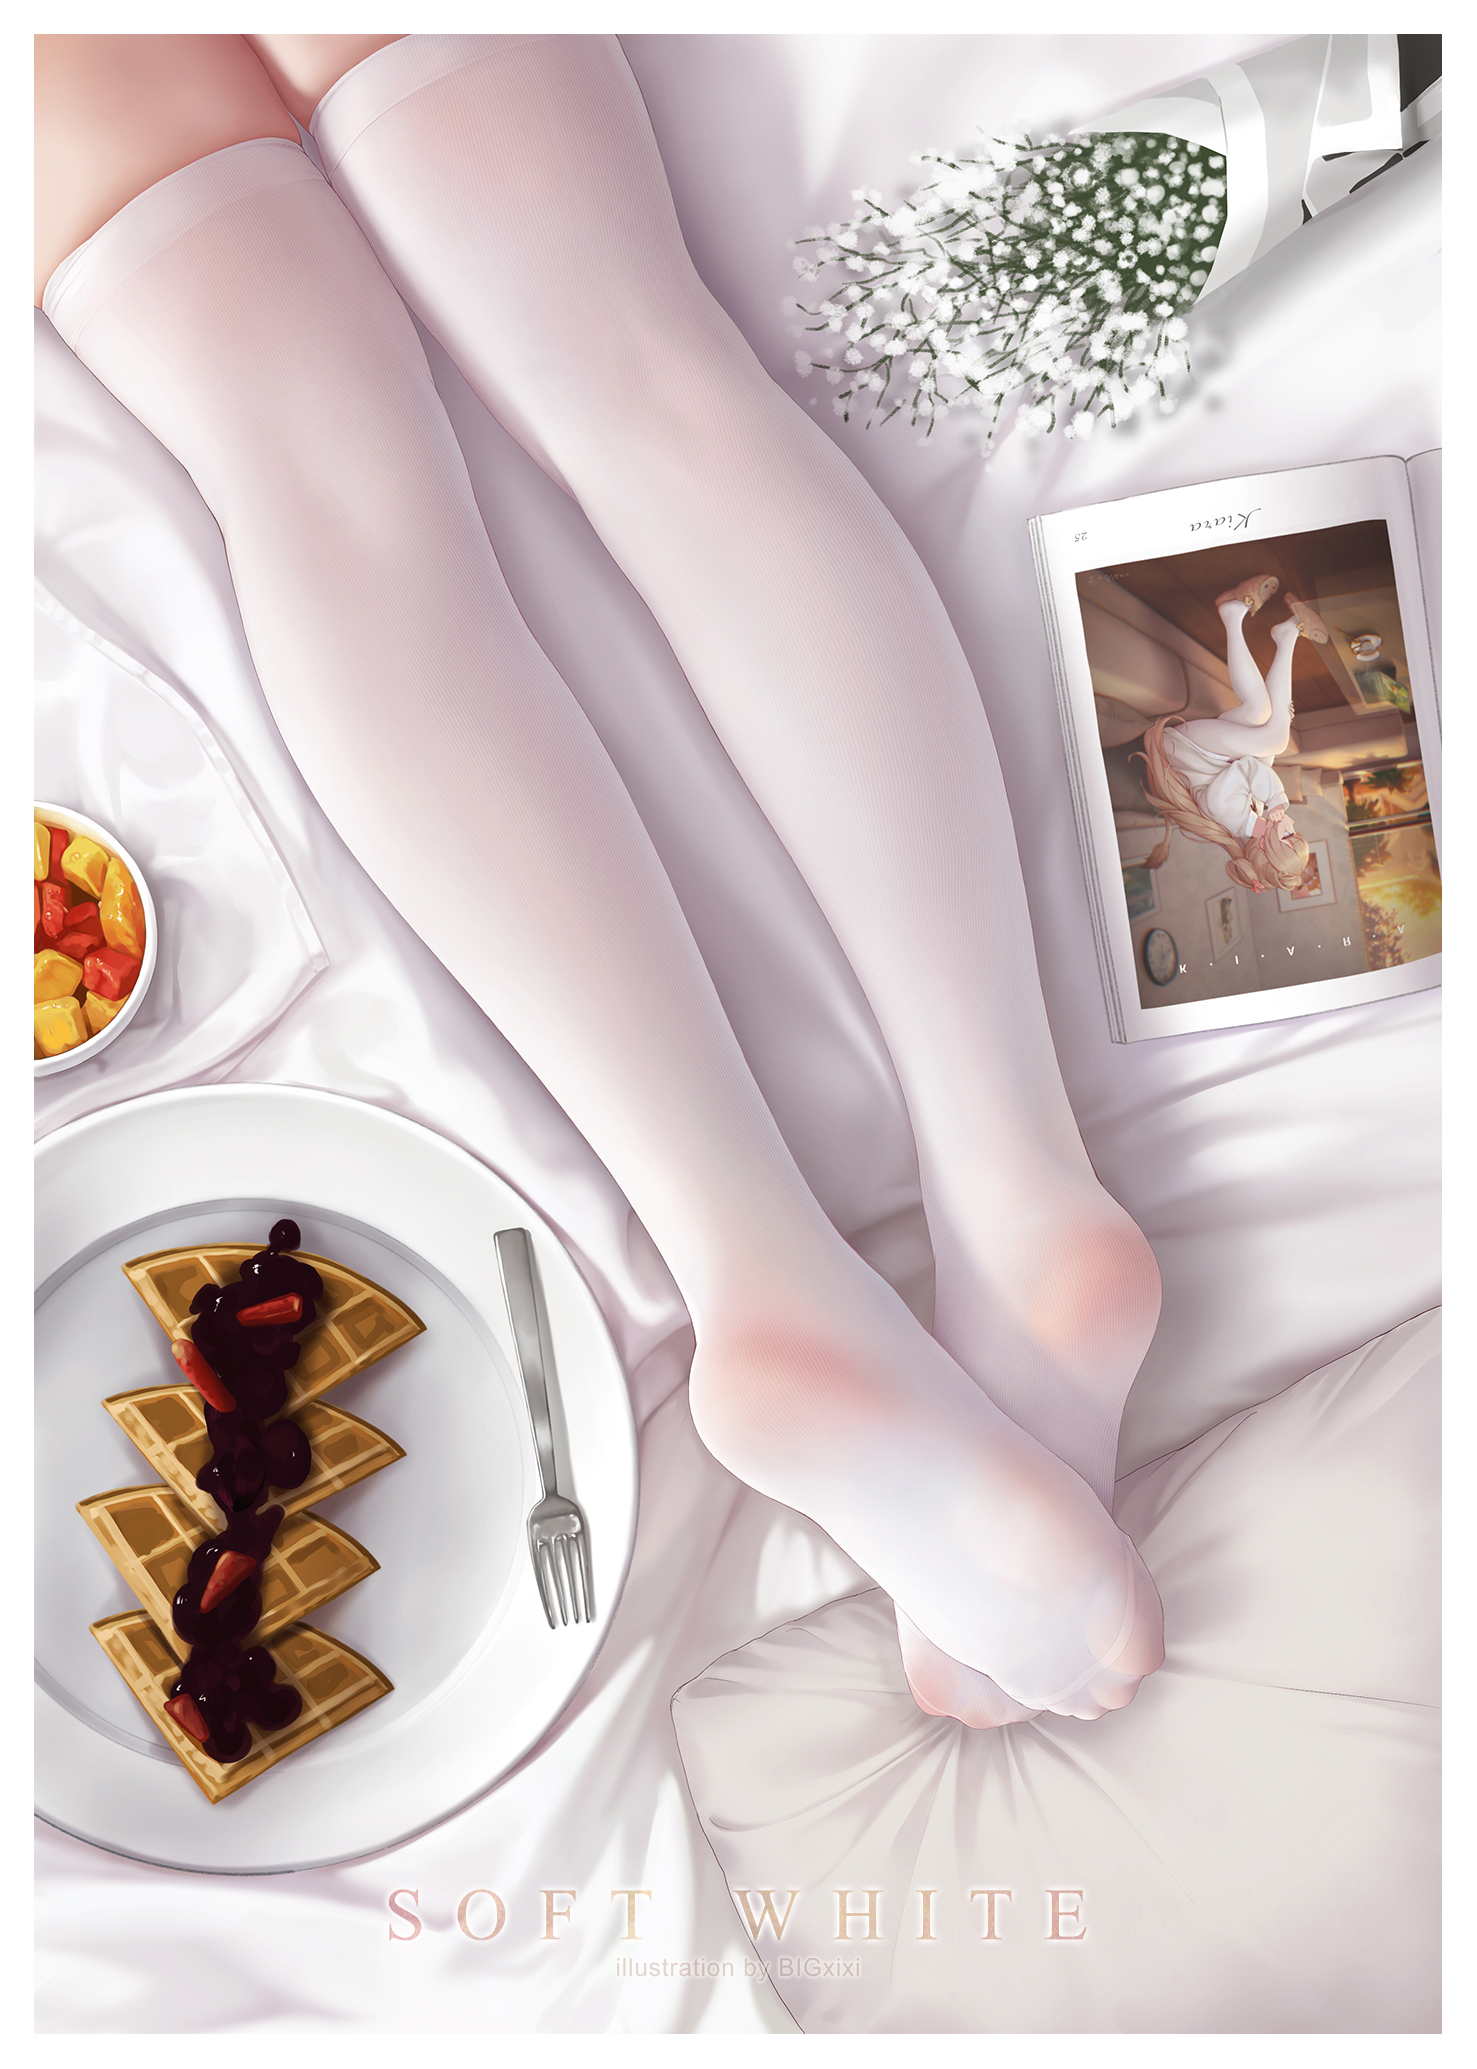 Anime 1477x2069 foot sole white thigh highs feet crossed food feet stockings fork picture fruit flowers anime girls portrait display Bigxixi